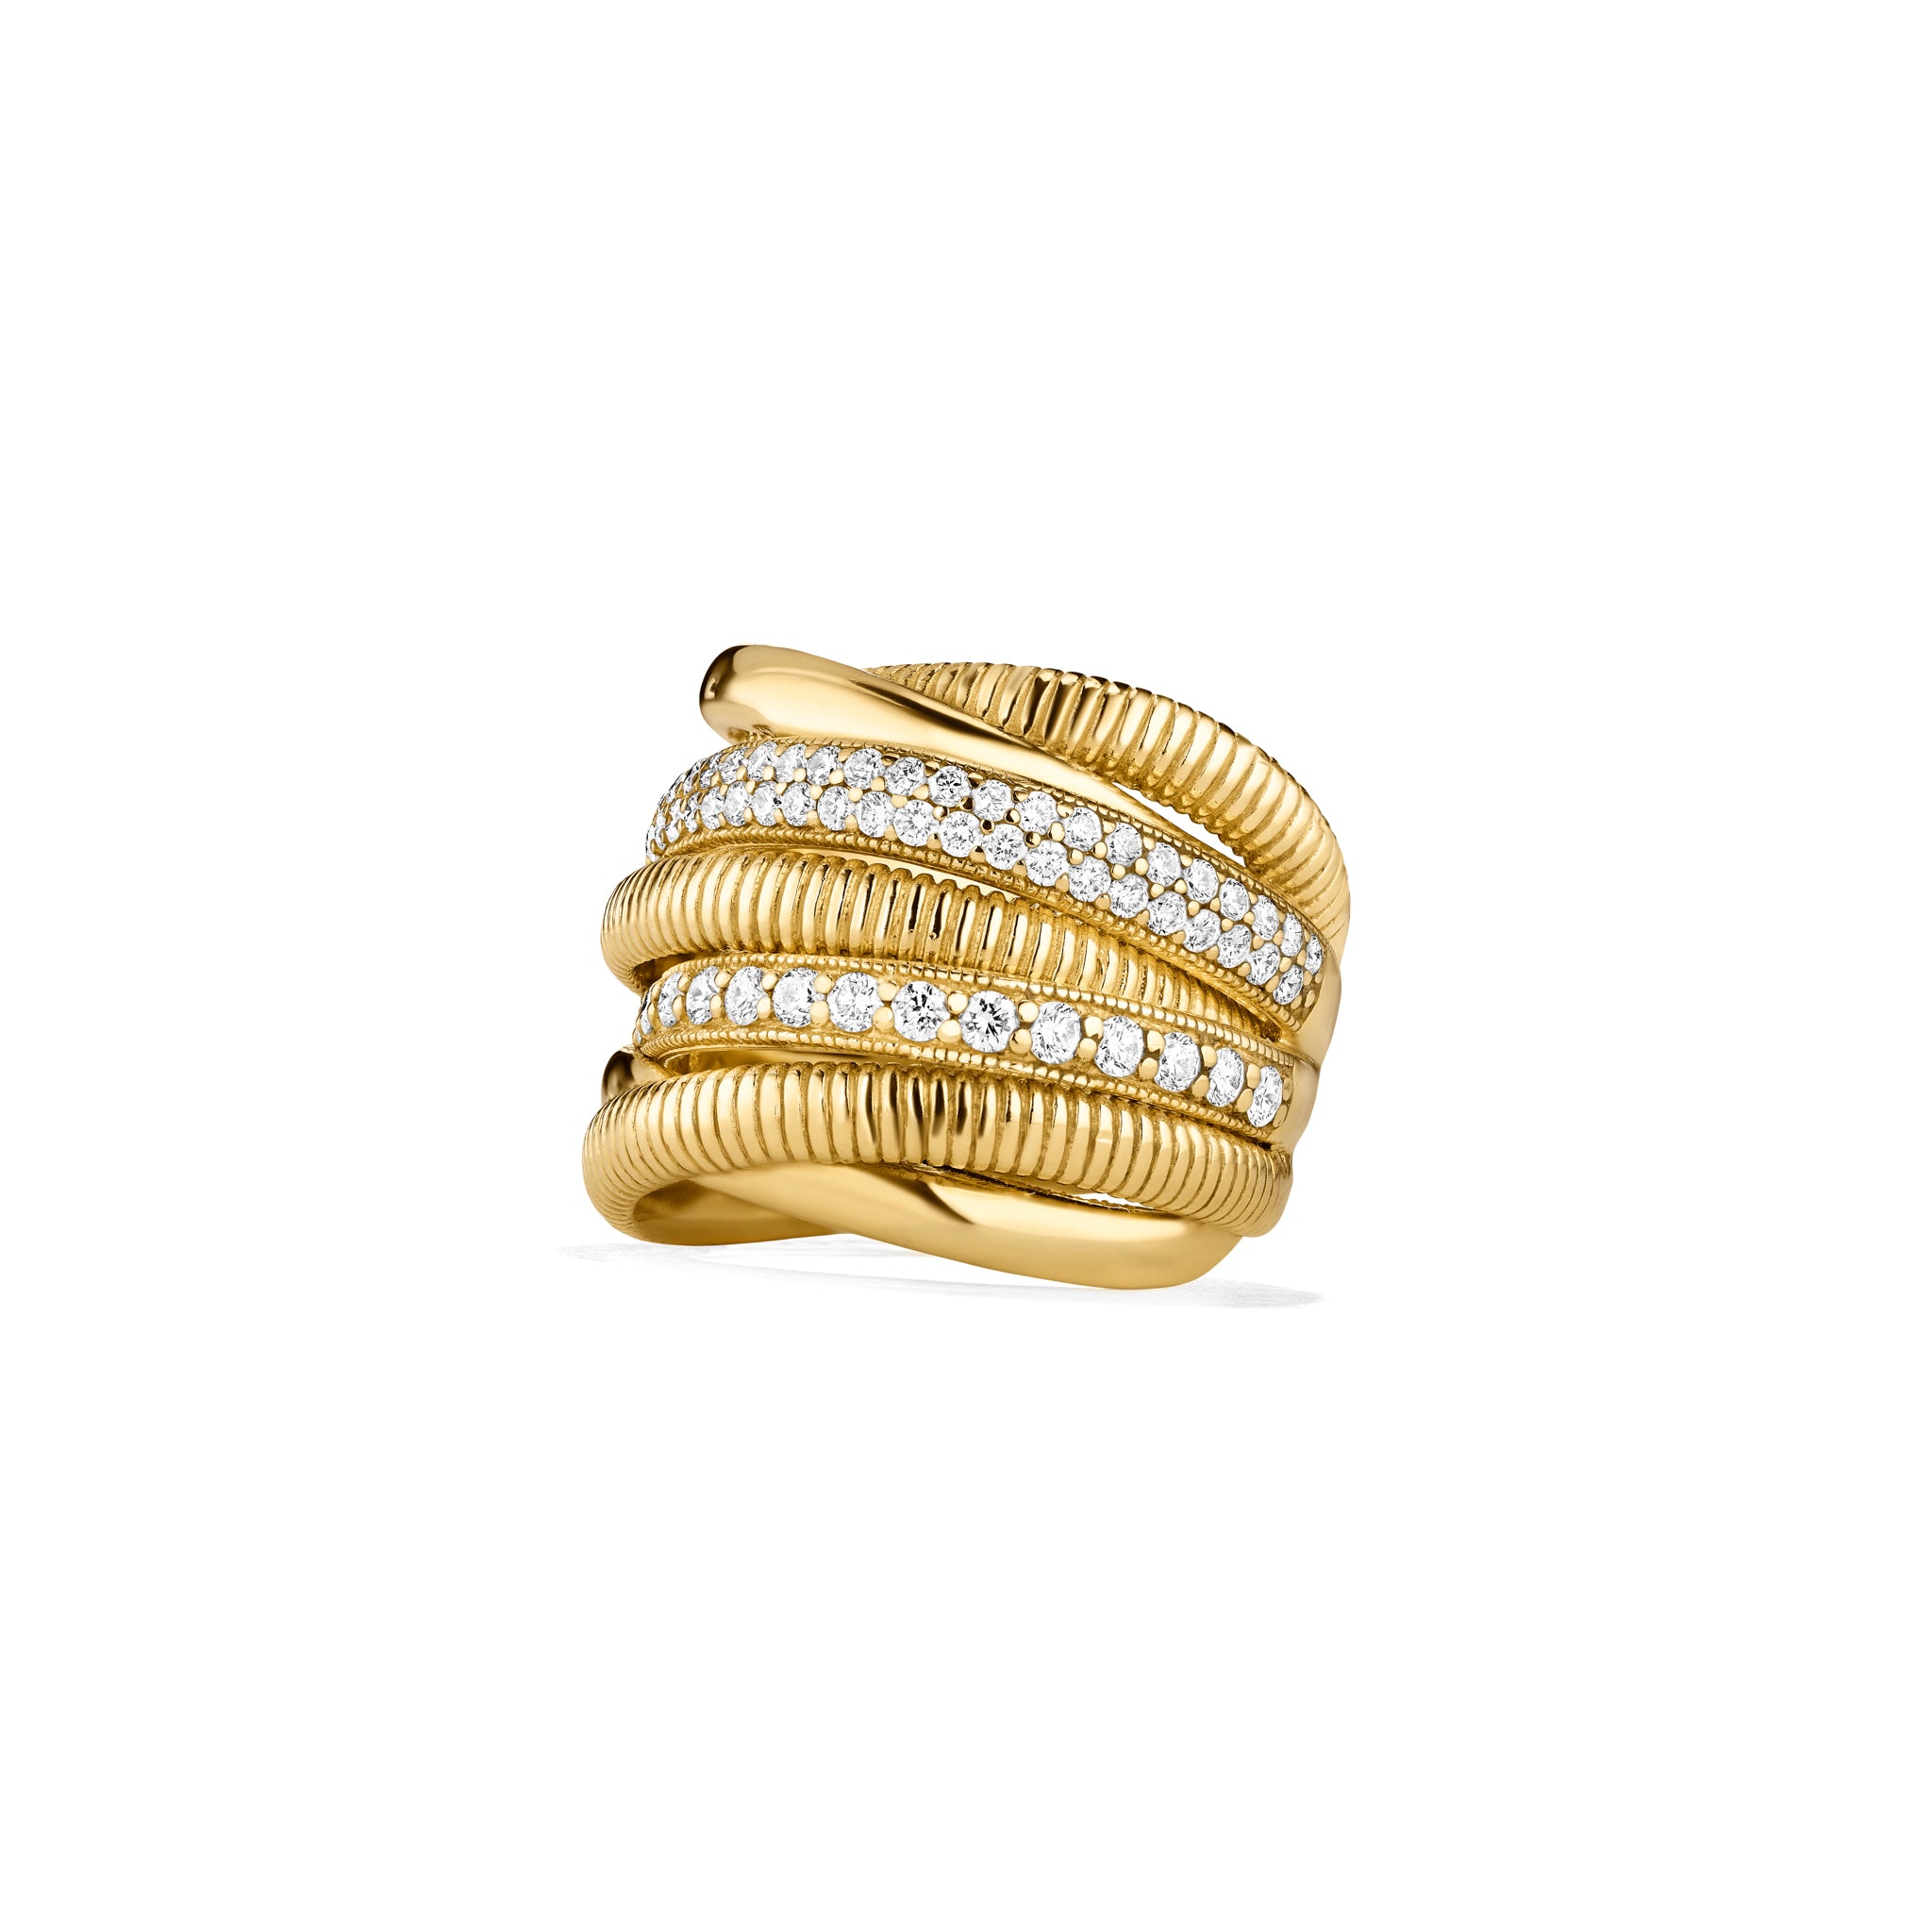 Eternity Seven Band Highway Ring with Diamonds in 18K